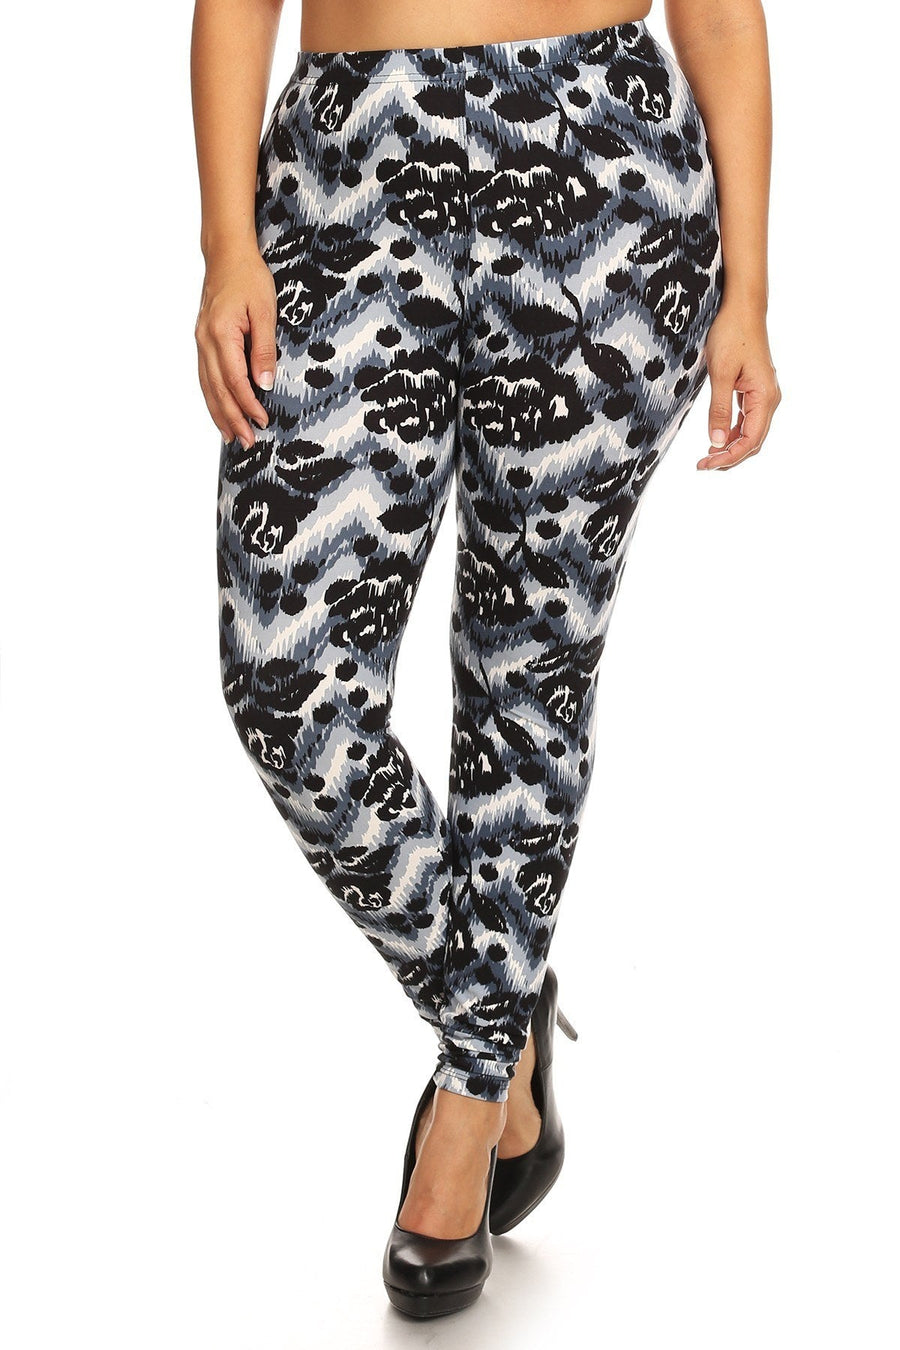 Abstract Print, Full Length Leggings In A Slim Fitting Style With A Banded High Waist - Passion 4 Fashion USA